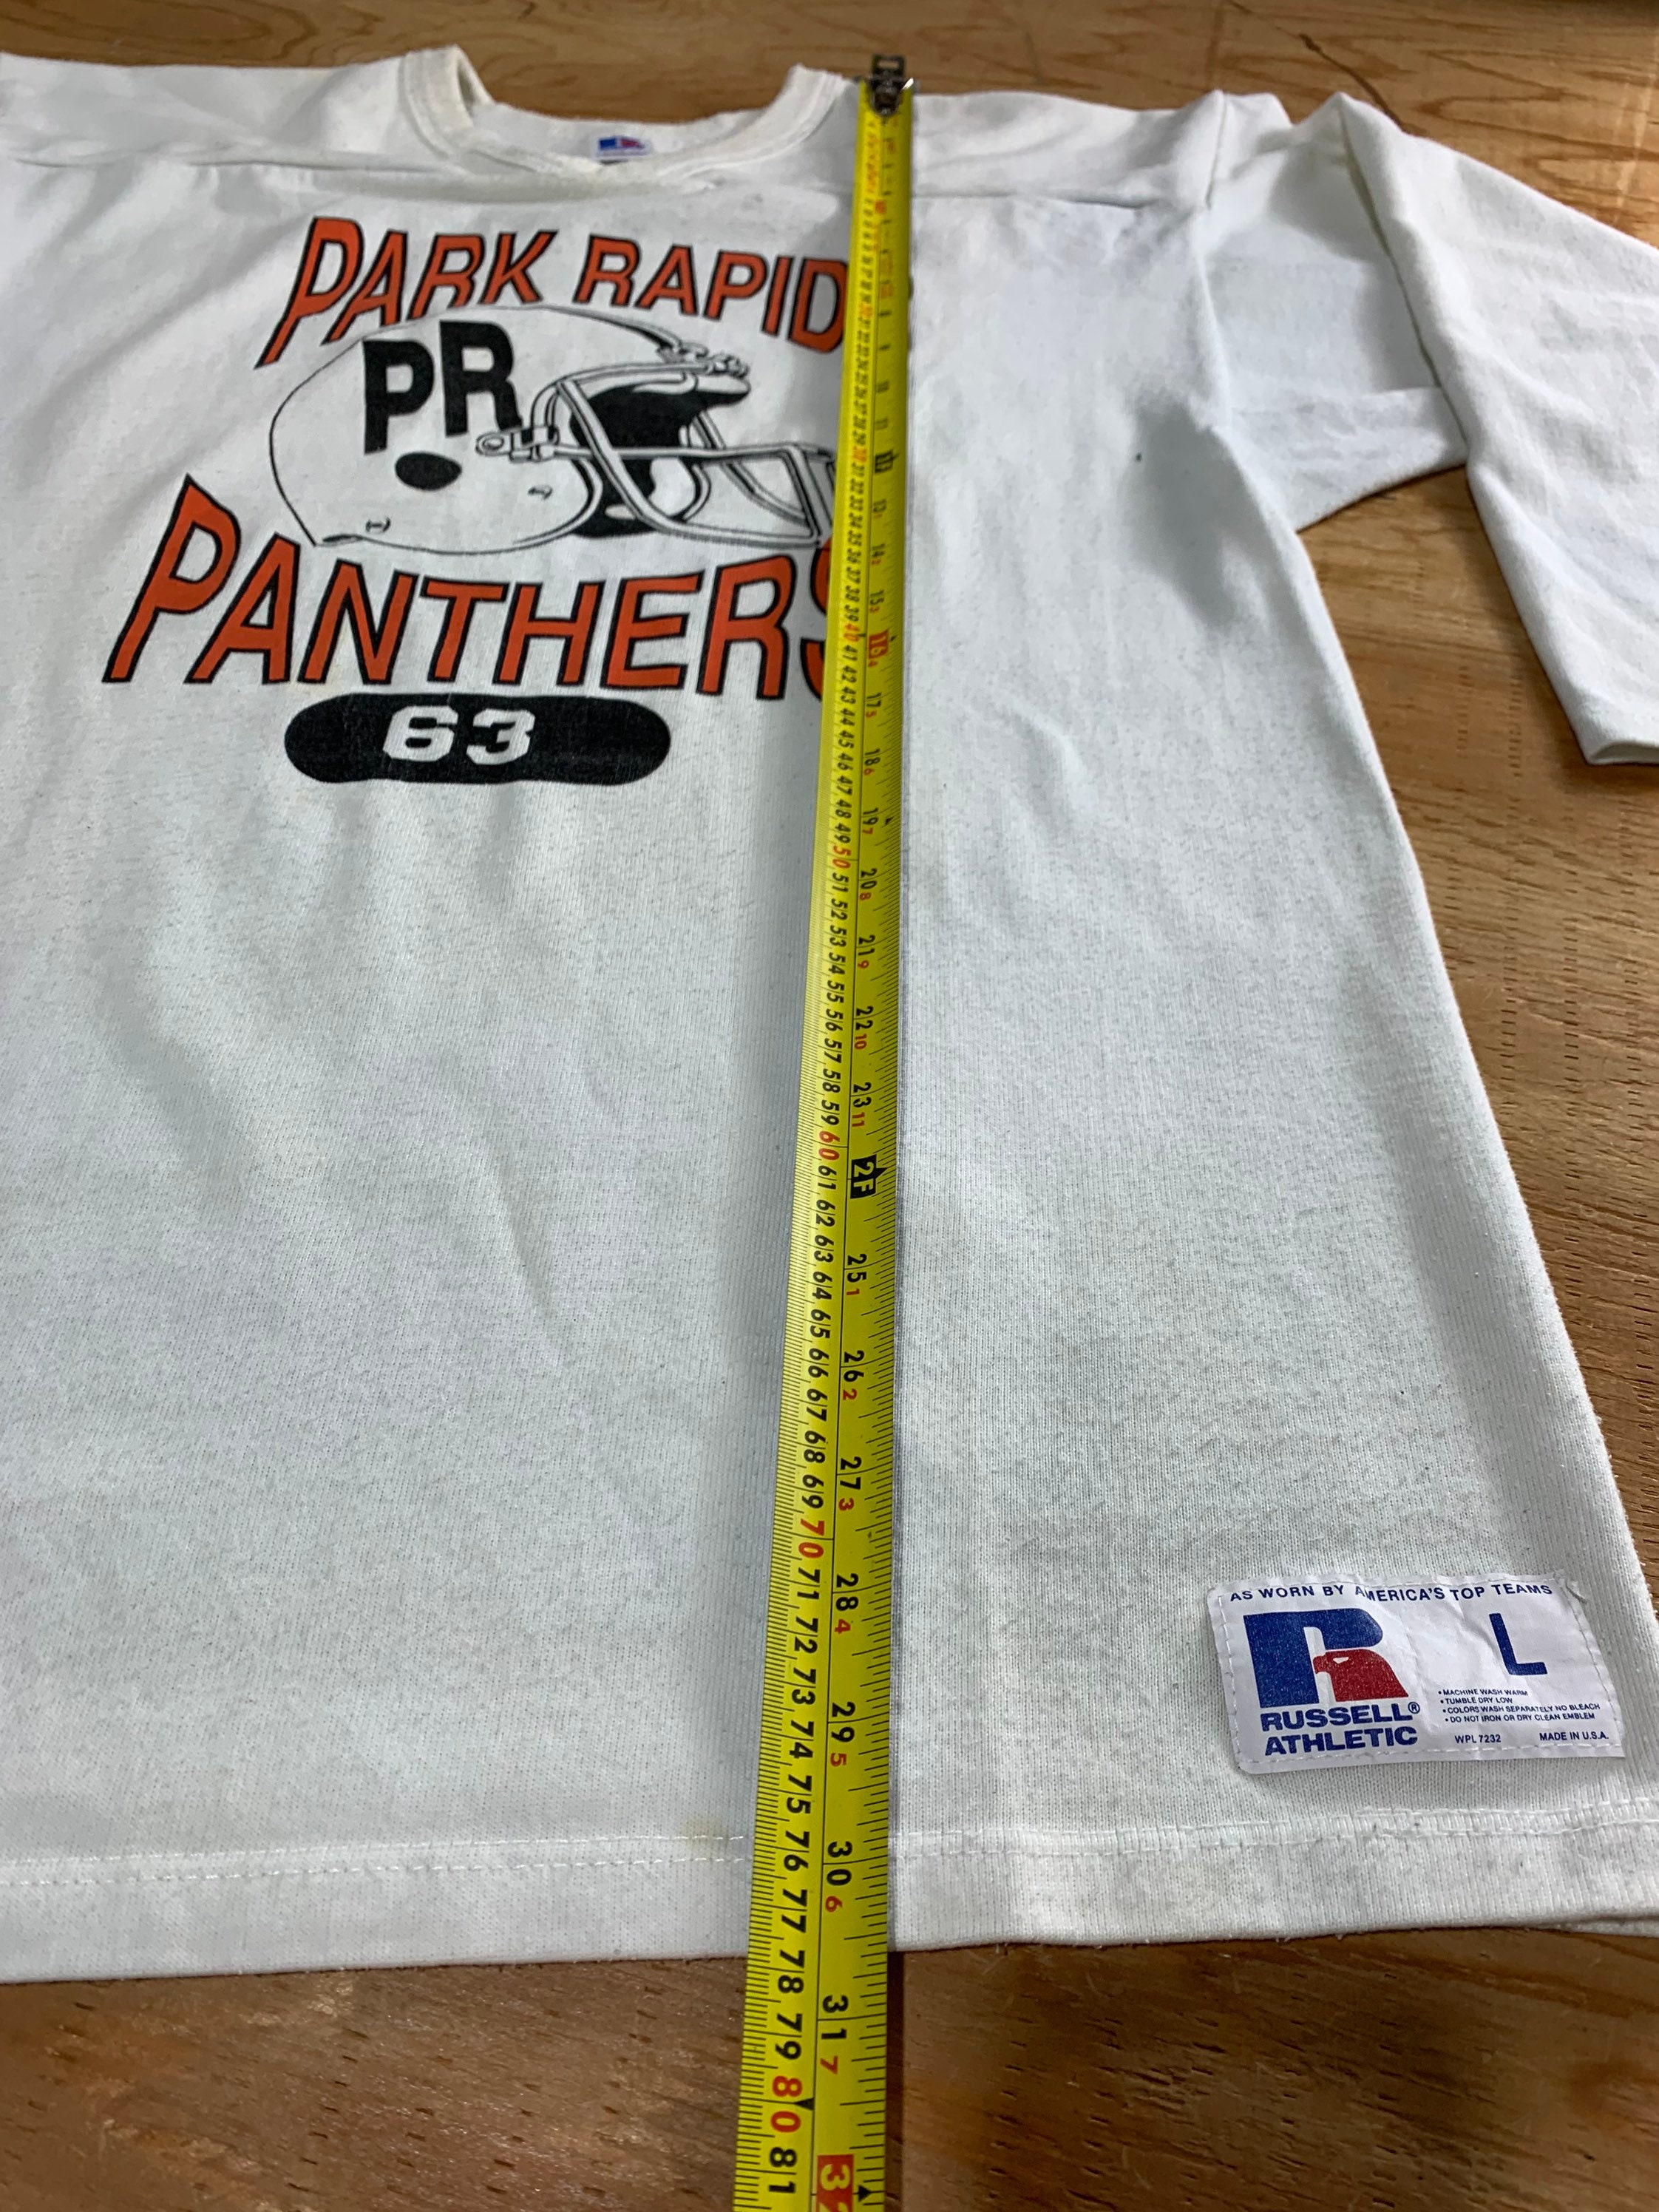 Vintage 90s Park Rapids Panthers Football Sportswear Graphic | Etsy